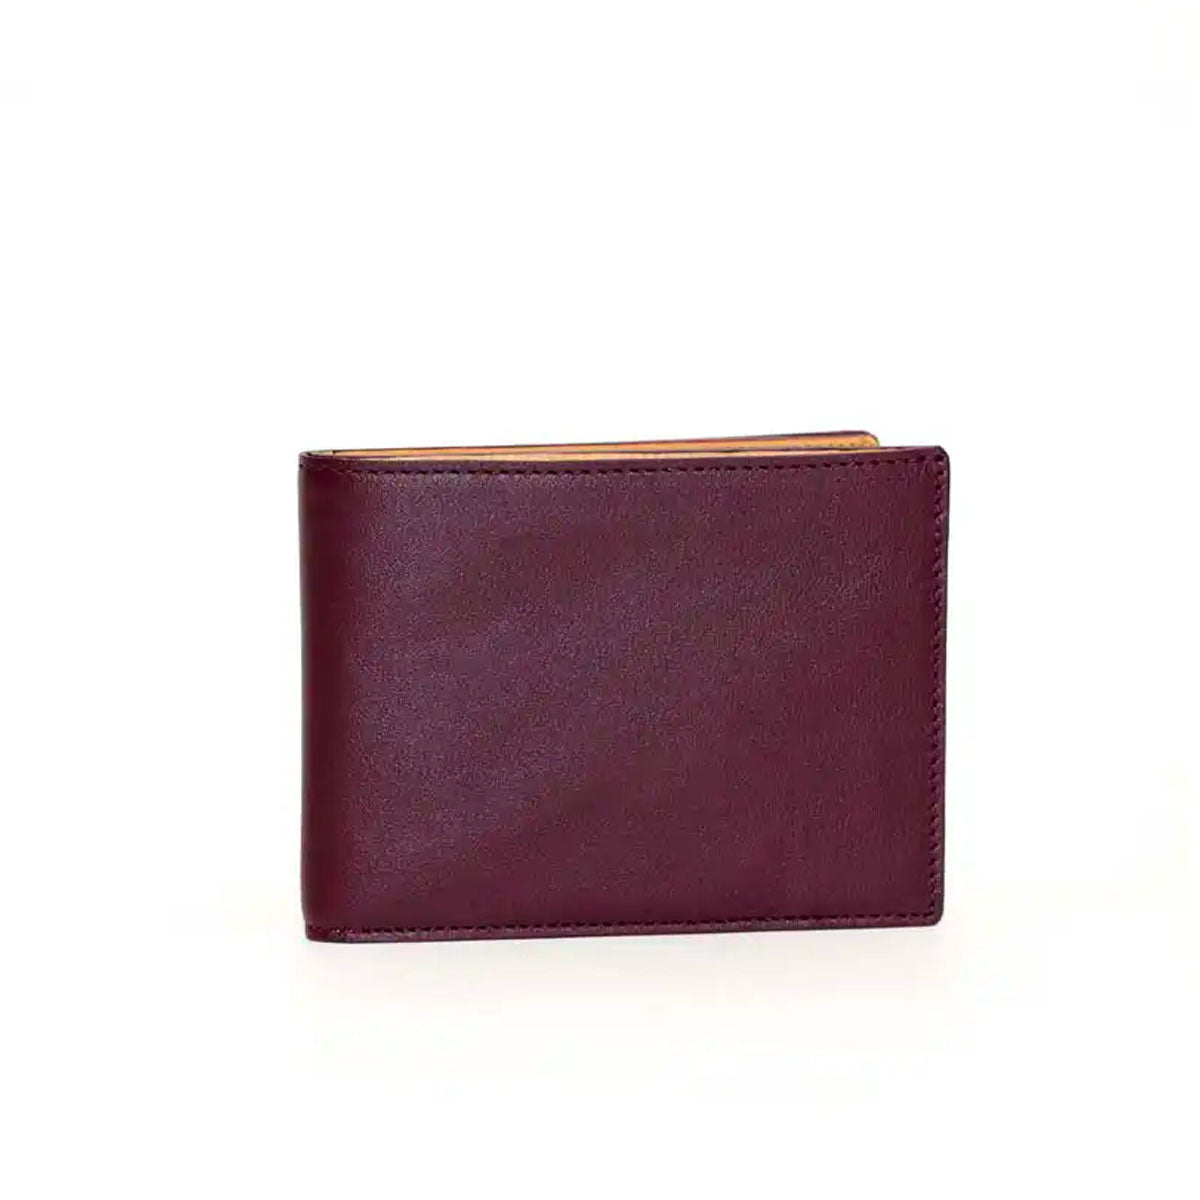 Bordeaux Wallet with Coin Purse